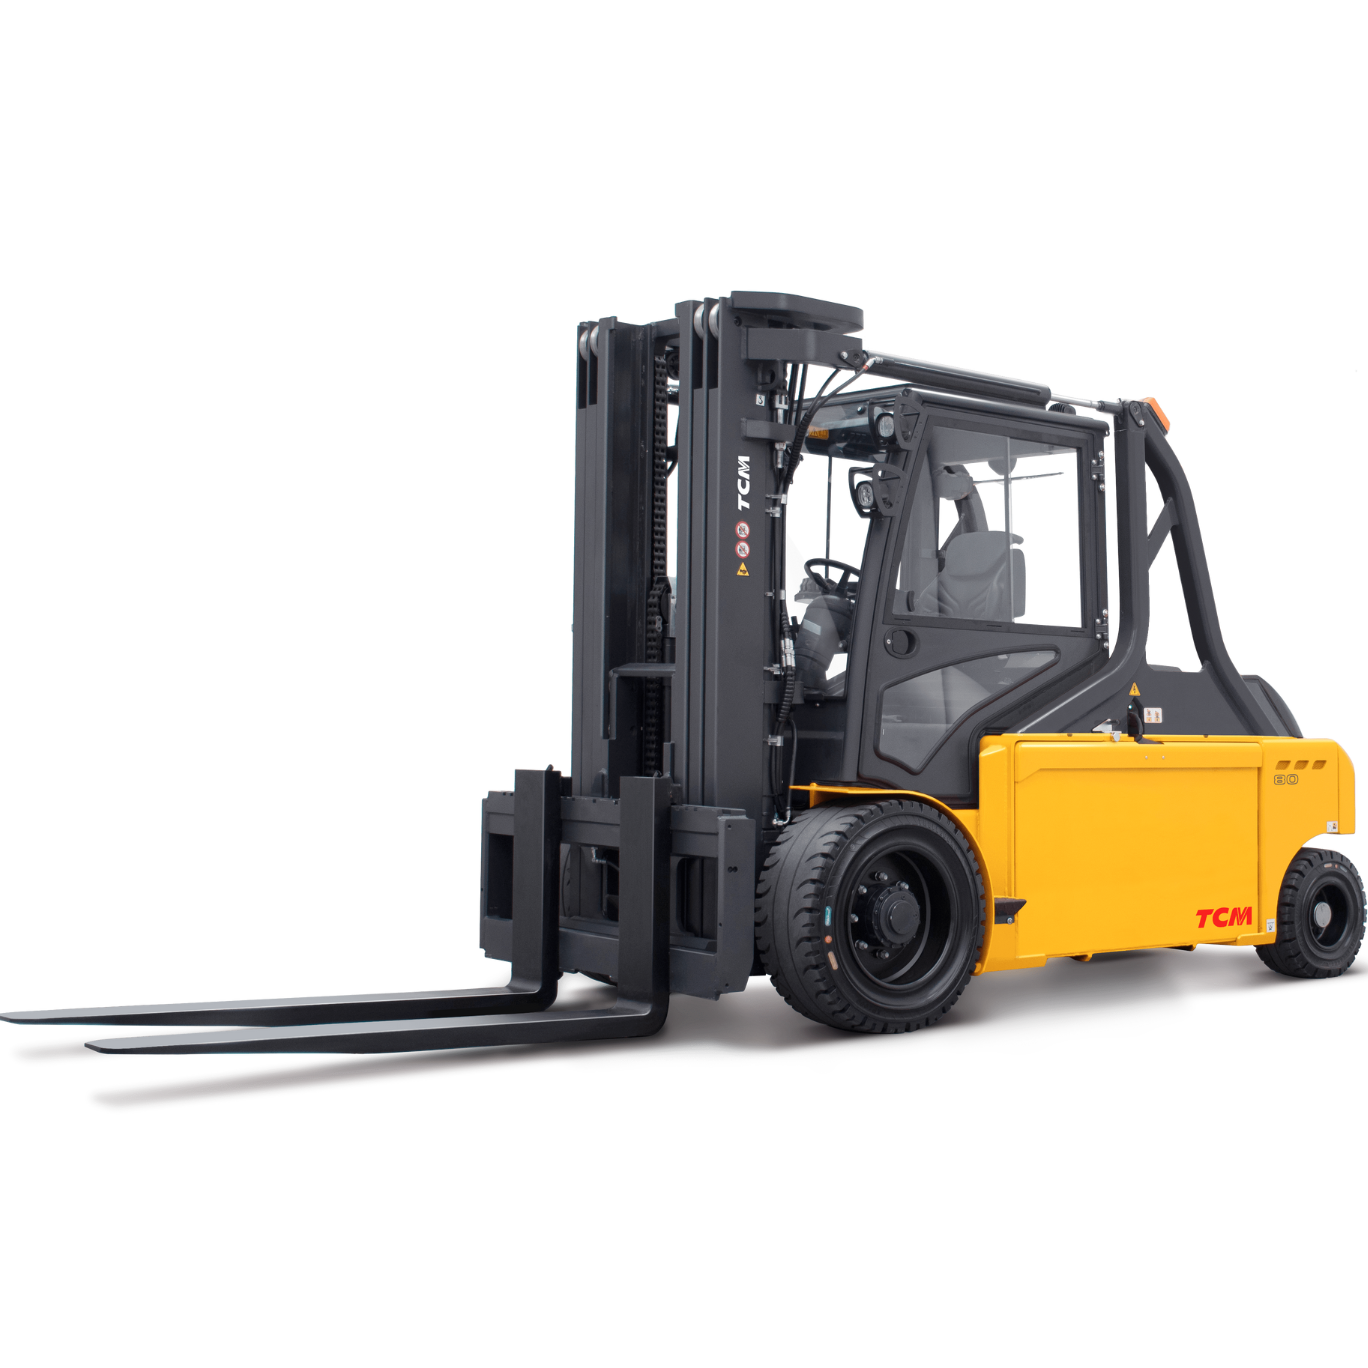 Lift More with the TCM New Heavy-Duty FHB 60-120 Electric Forklift Truck